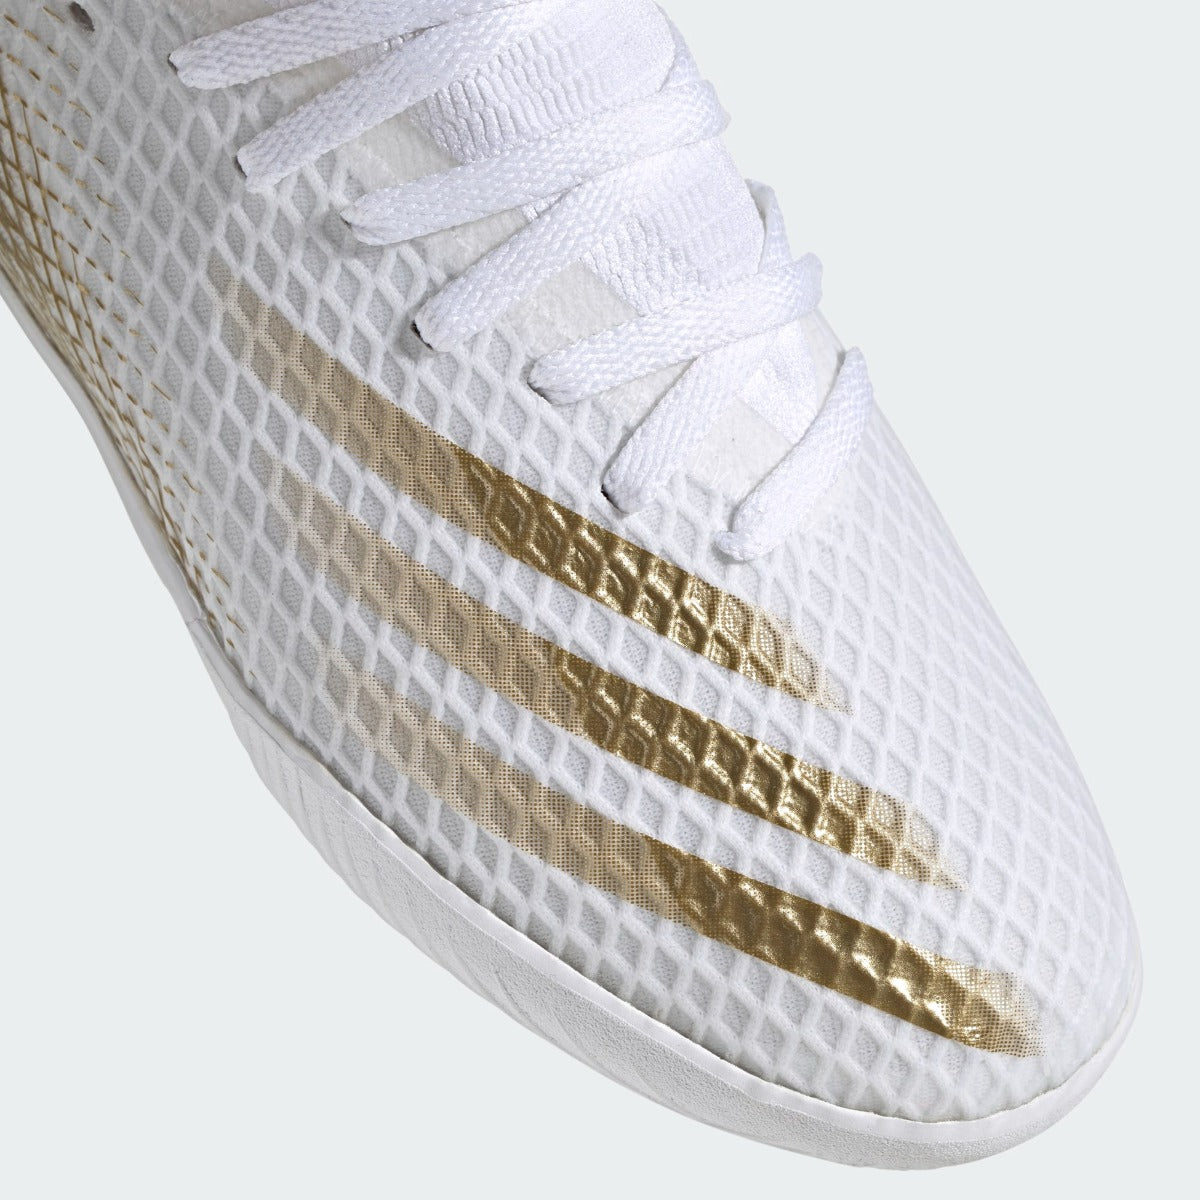 Adidas JR X Ghosted.3 IN - White-Gold